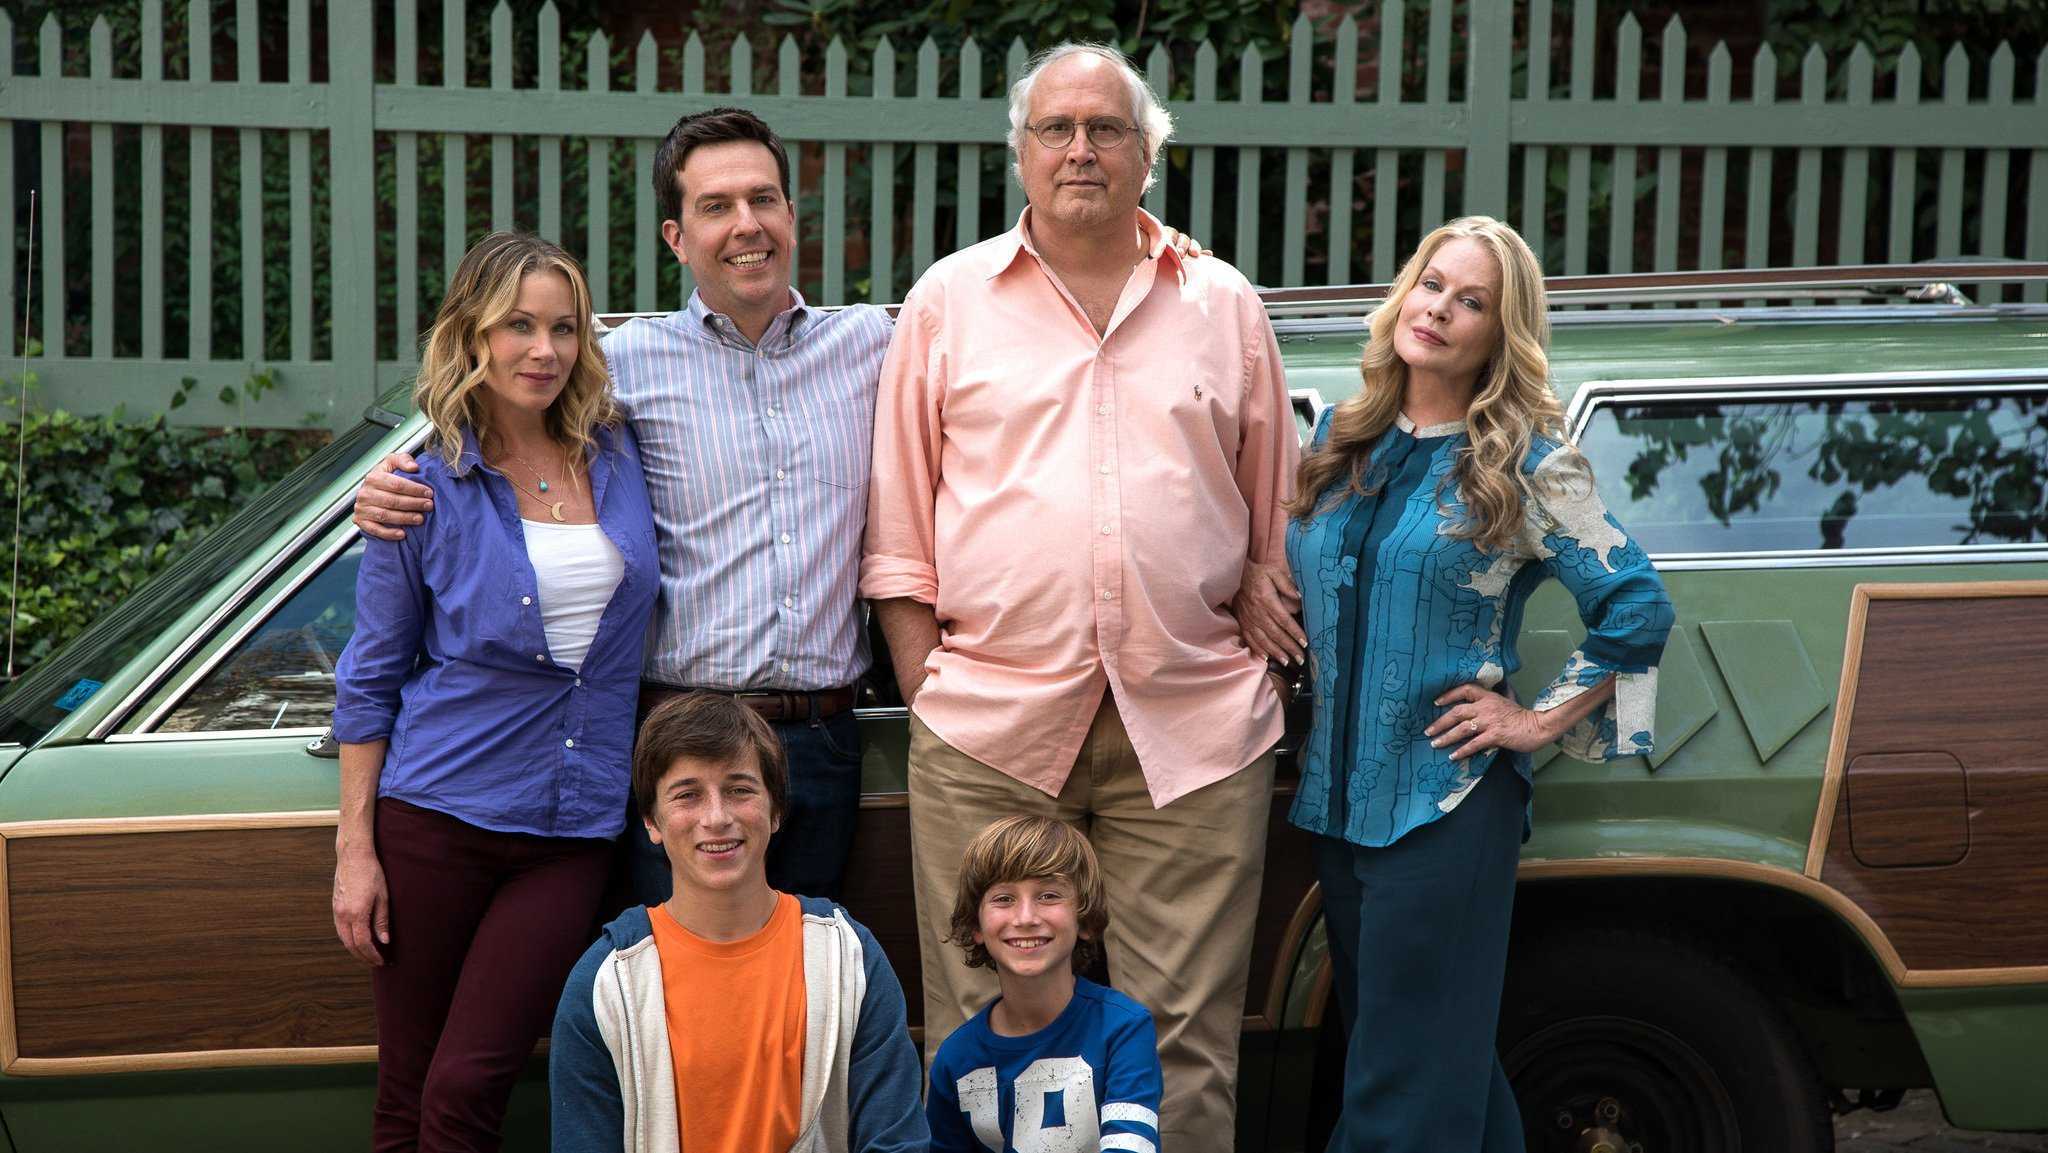 Image from the movie "Vacation"